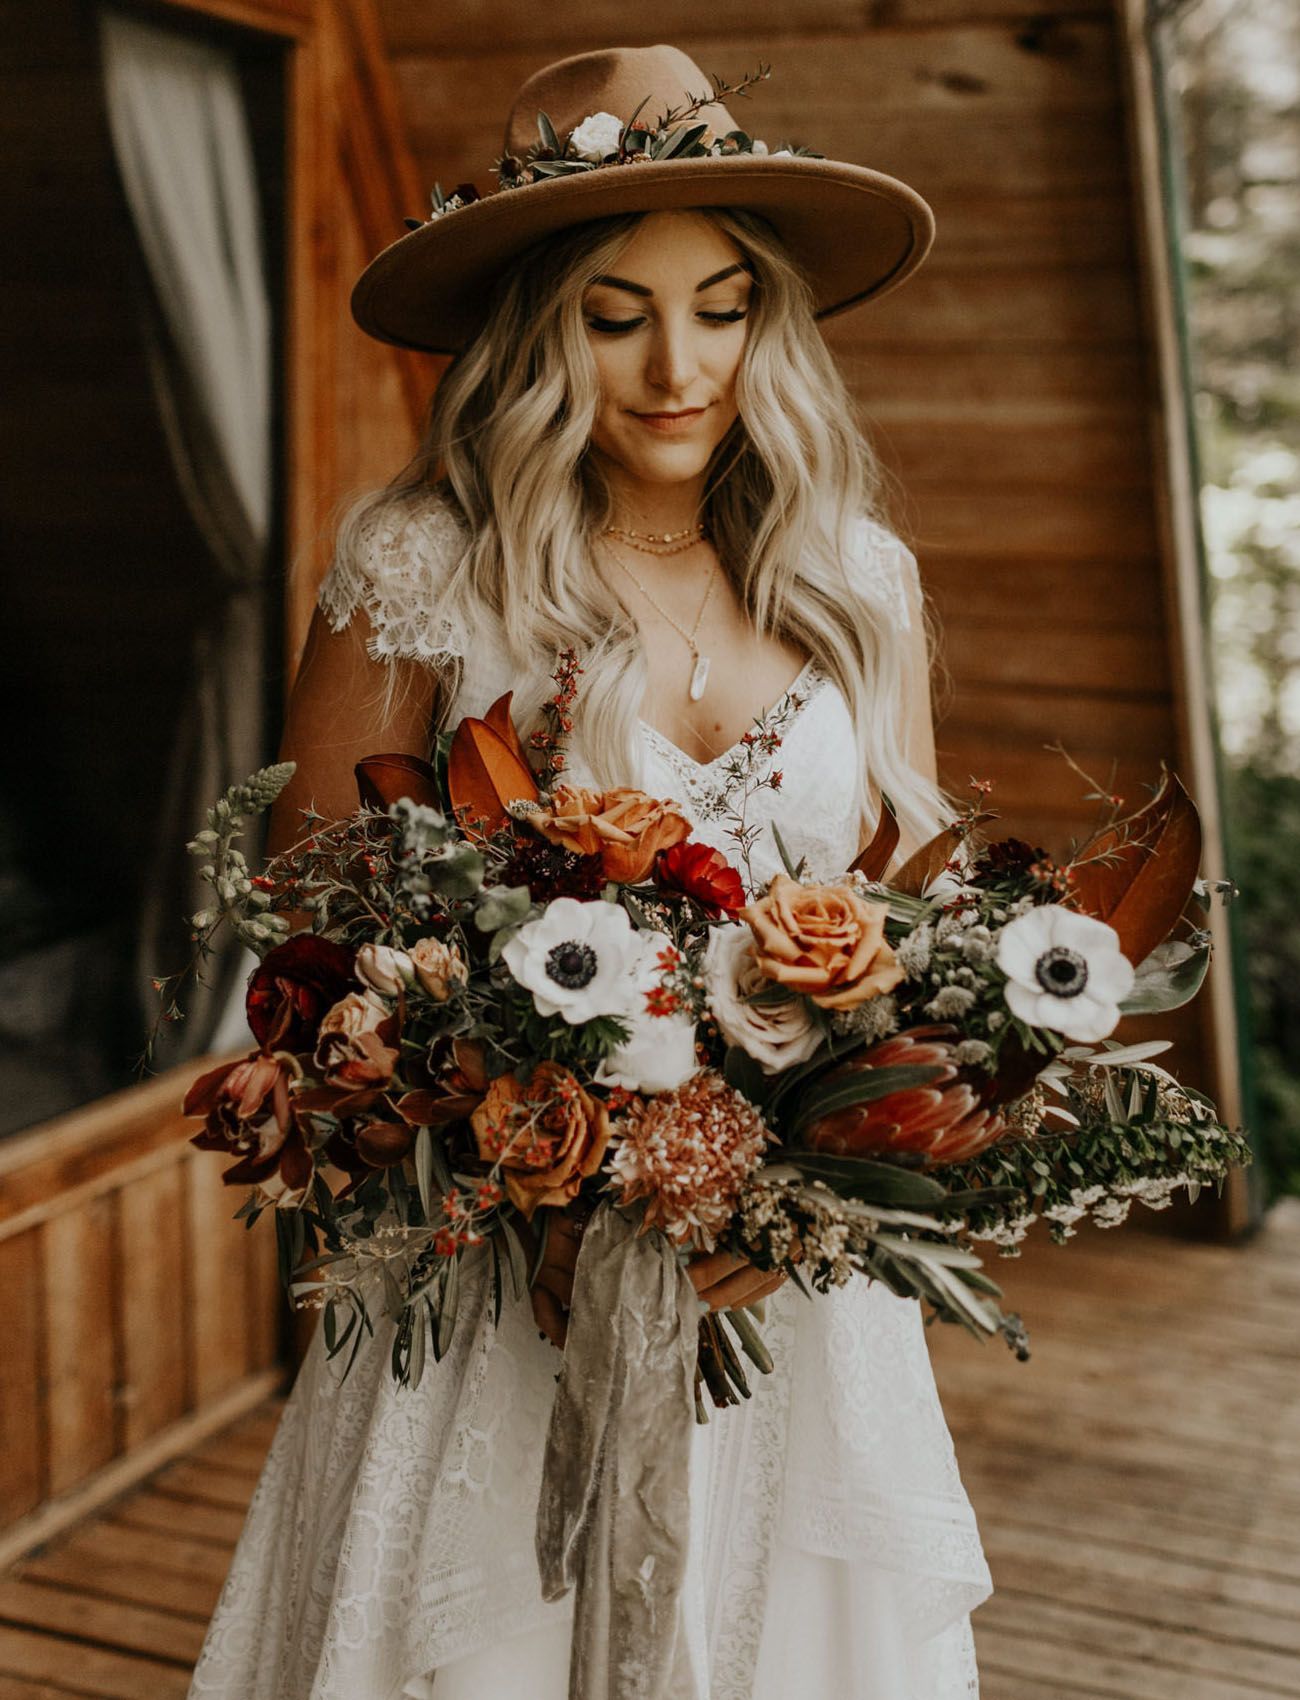 A Woodsy Forest Elopement in Mt. Rainier National Park | Green Wedding Shoes -   15 wedding Forest bouquet ideas